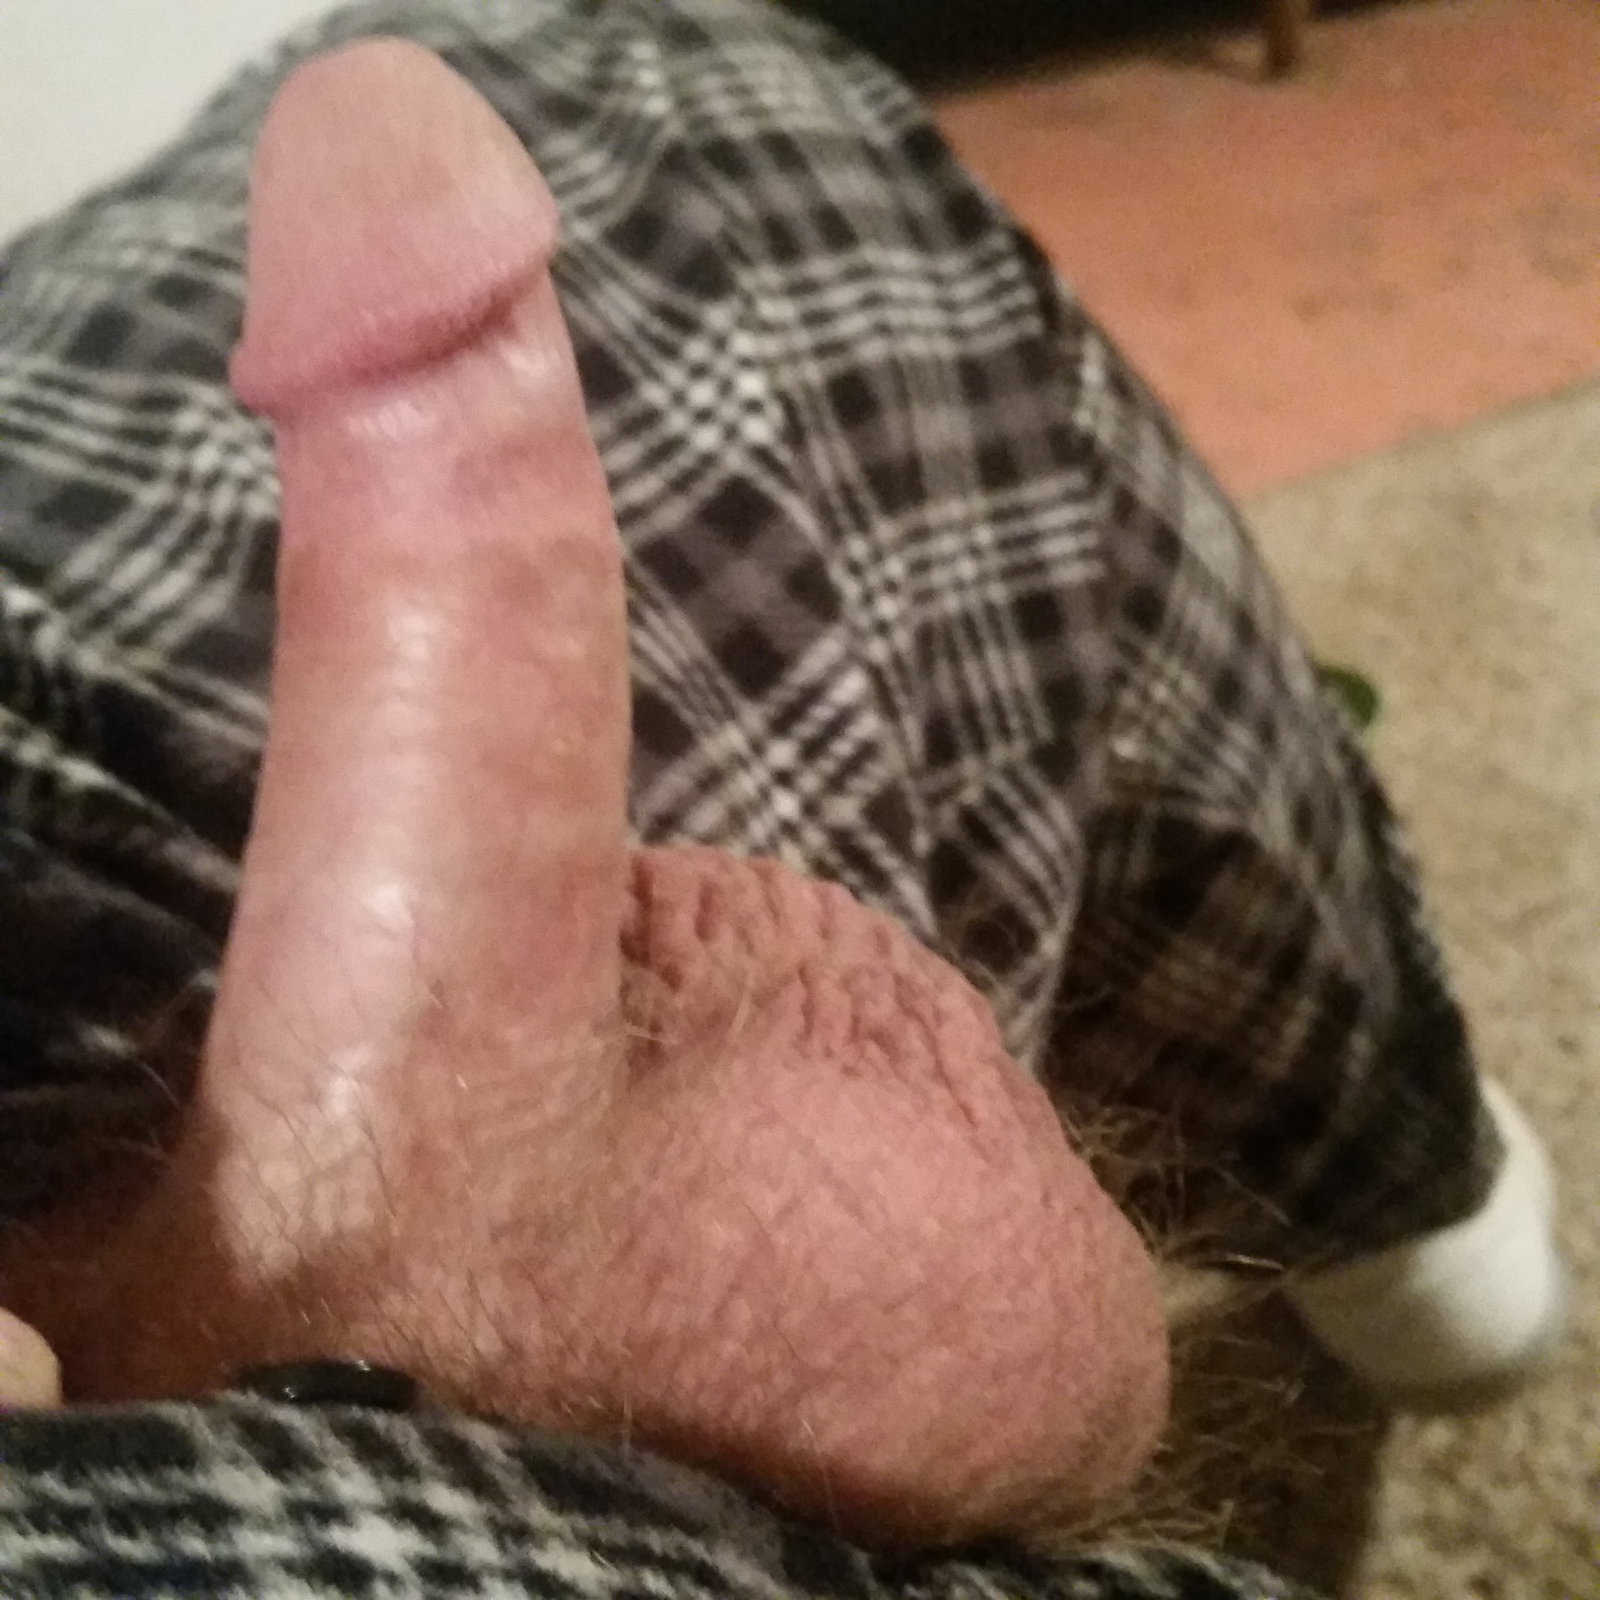 Photo by whiteyford6969 with the username @whiteyford6969, who is a verified user,  April 3, 2019 at 5:27 AM. The post is about the topic Small Cocks and the text says 'Been edging to @NaughtyMommy for hours!'